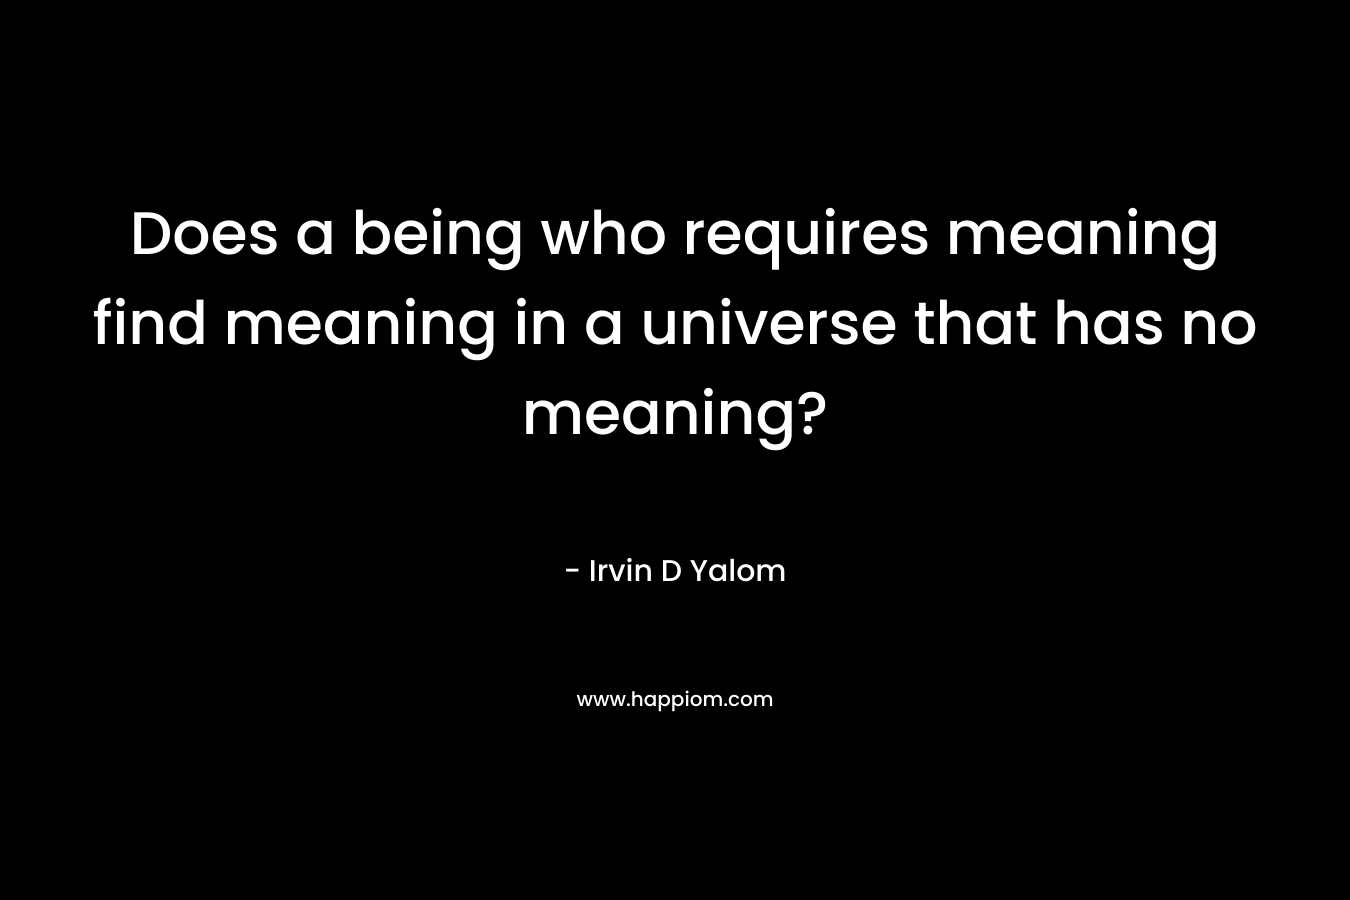 Does a being who requires meaning find meaning in a universe that has no meaning?